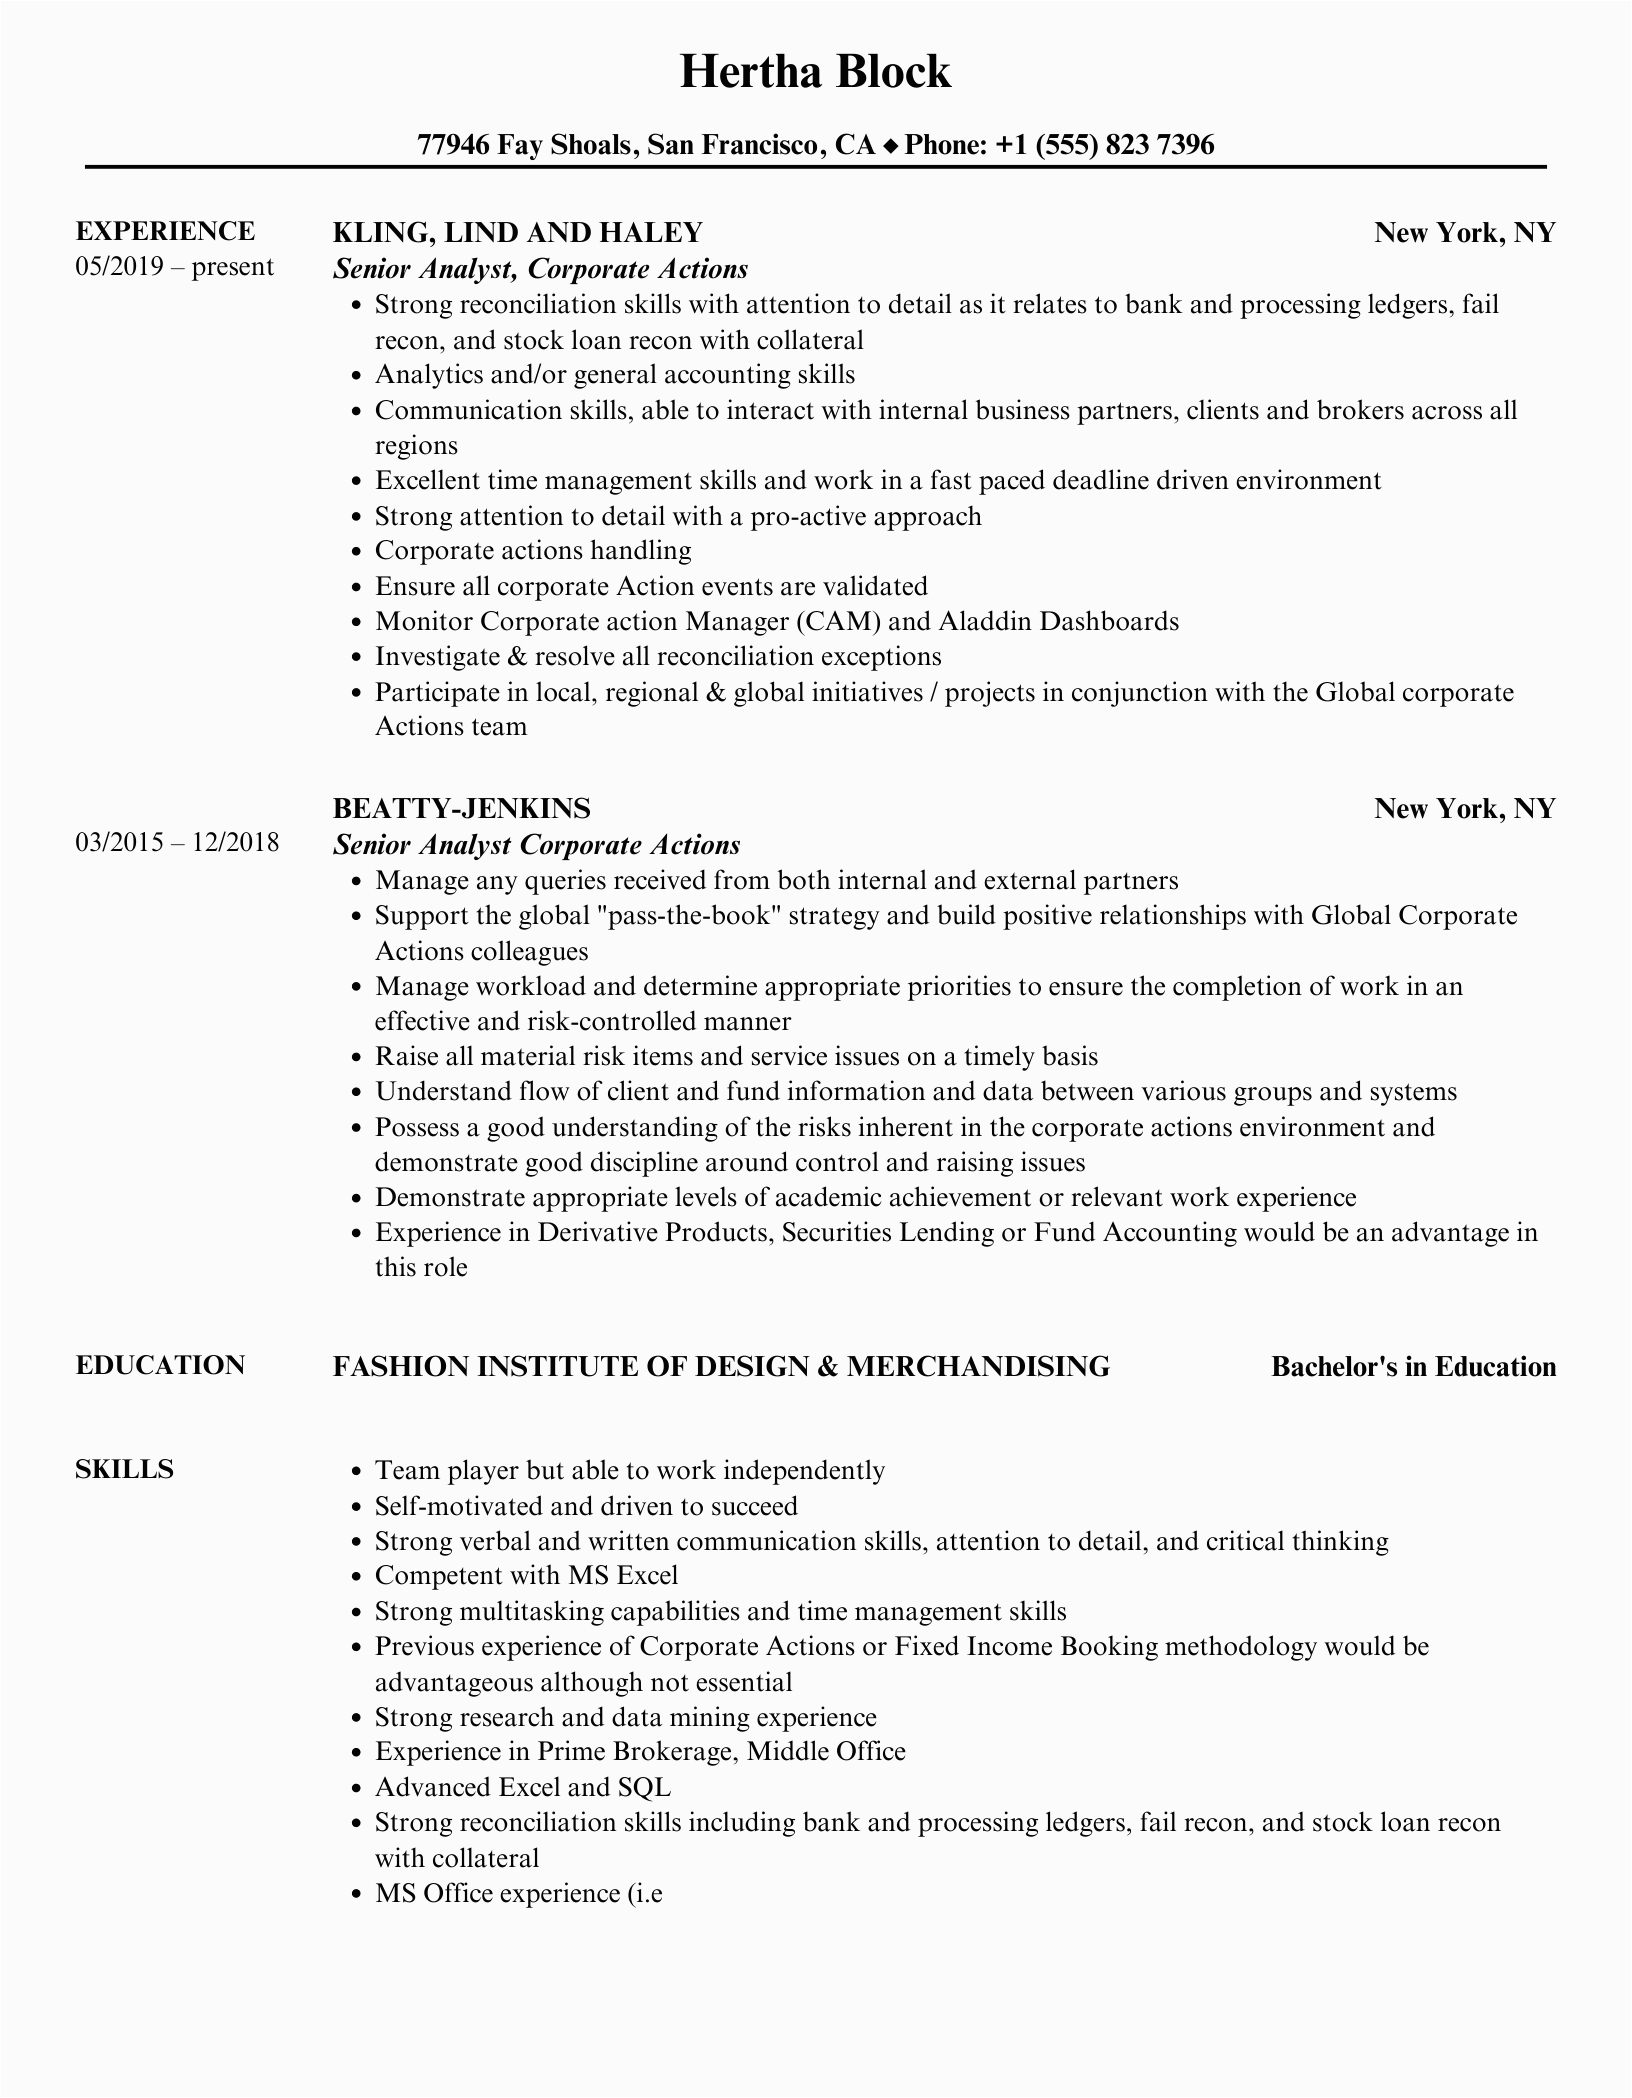 Sample Resume Of Corporate Actions Analyst Analyst Corporate Actions Resume Samples